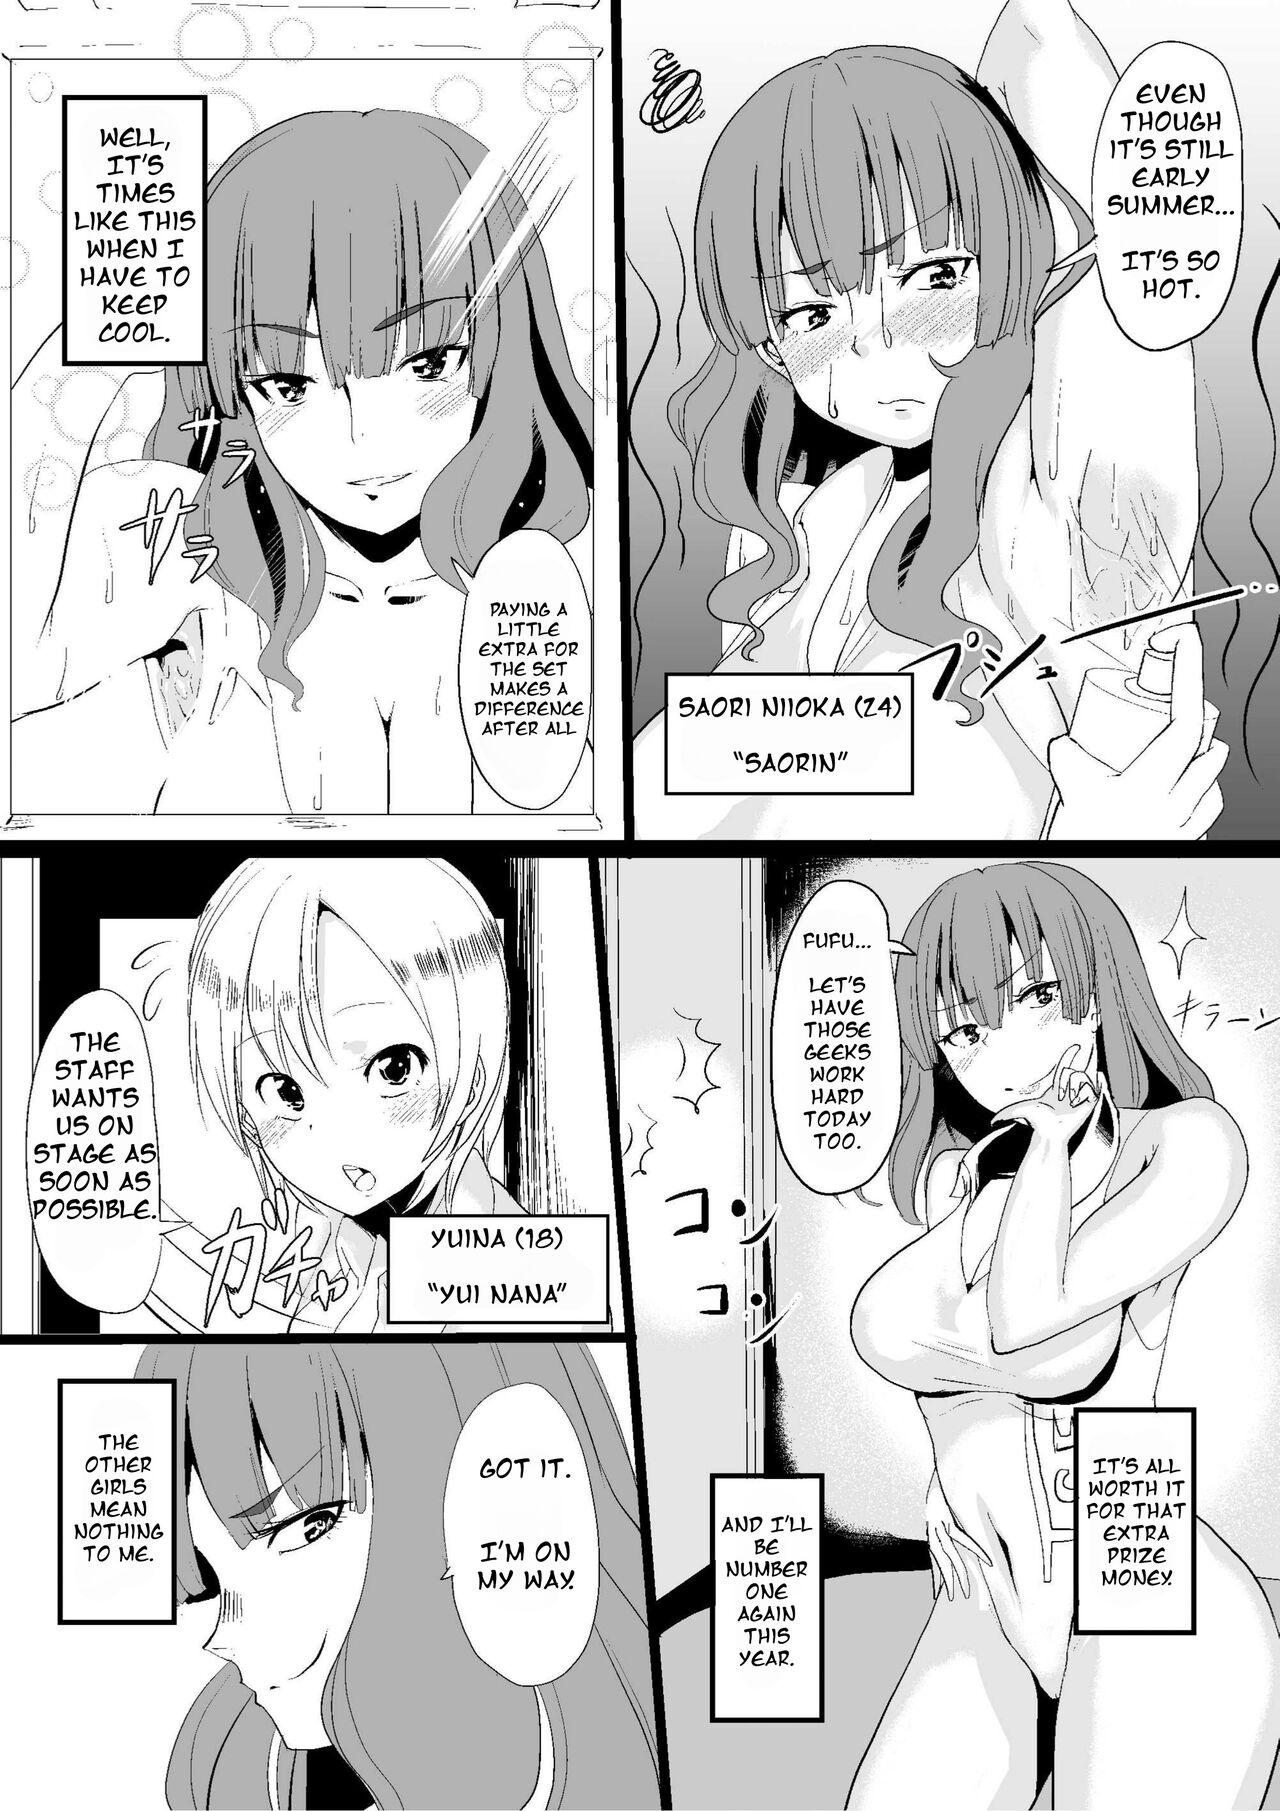 Black Hair Onna no Kokoro o Ossanka Suru Camera | Changing a Woman's Heart to an Old Man's With a Camera - Original For - Page 3